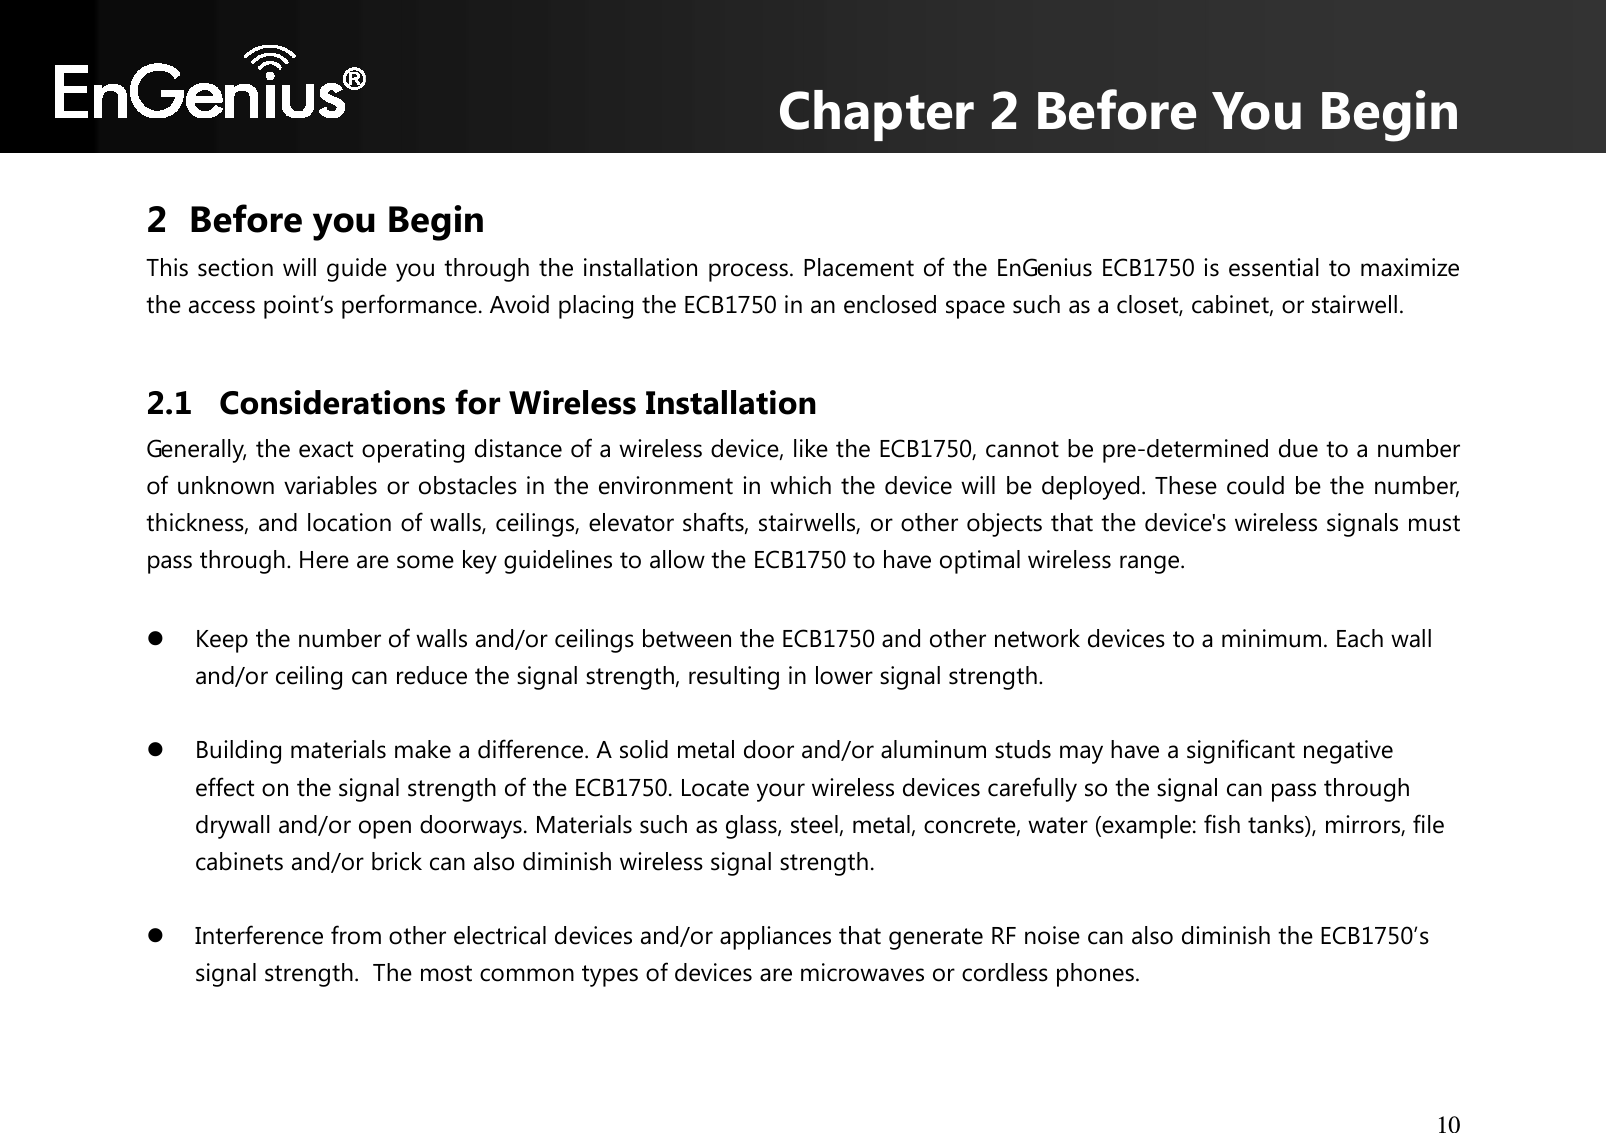 Chapter 2 Before You Begin 10  2 Before you Begin This section will guide you through the installation process. Placement of the EnGenius ECB1750 is essential to maximize the access point’s performance. Avoid placing the ECB1750 in an enclosed space such as a closet, cabinet, or stairwell.  2.1 Considerations for Wireless Installation Generally, the exact operating distance of a wireless device, like the ECB1750, cannot be pre-determined due to a number of unknown variables or obstacles in the environment in which the device will be deployed. These could be the number, thickness, and location of walls, ceilings, elevator shafts, stairwells, or other objects that the device&apos;s wireless signals must pass through. Here are some key guidelines to allow the ECB1750 to have optimal wireless range.   Keep the number of walls and/or ceilings between the ECB1750 and other network devices to a minimum. Each wall and/or ceiling can reduce the signal strength, resulting in lower signal strength.   Building materials make a difference. A solid metal door and/or aluminum studs may have a significant negative effect on the signal strength of the ECB1750. Locate your wireless devices carefully so the signal can pass through drywall and/or open doorways. Materials such as glass, steel, metal, concrete, water (example: fish tanks), mirrors, file cabinets and/or brick can also diminish wireless signal strength.   Interference from other electrical devices and/or appliances that generate RF noise can also diminish the ECB1750’s signal strength.  The most common types of devices are microwaves or cordless phones.  